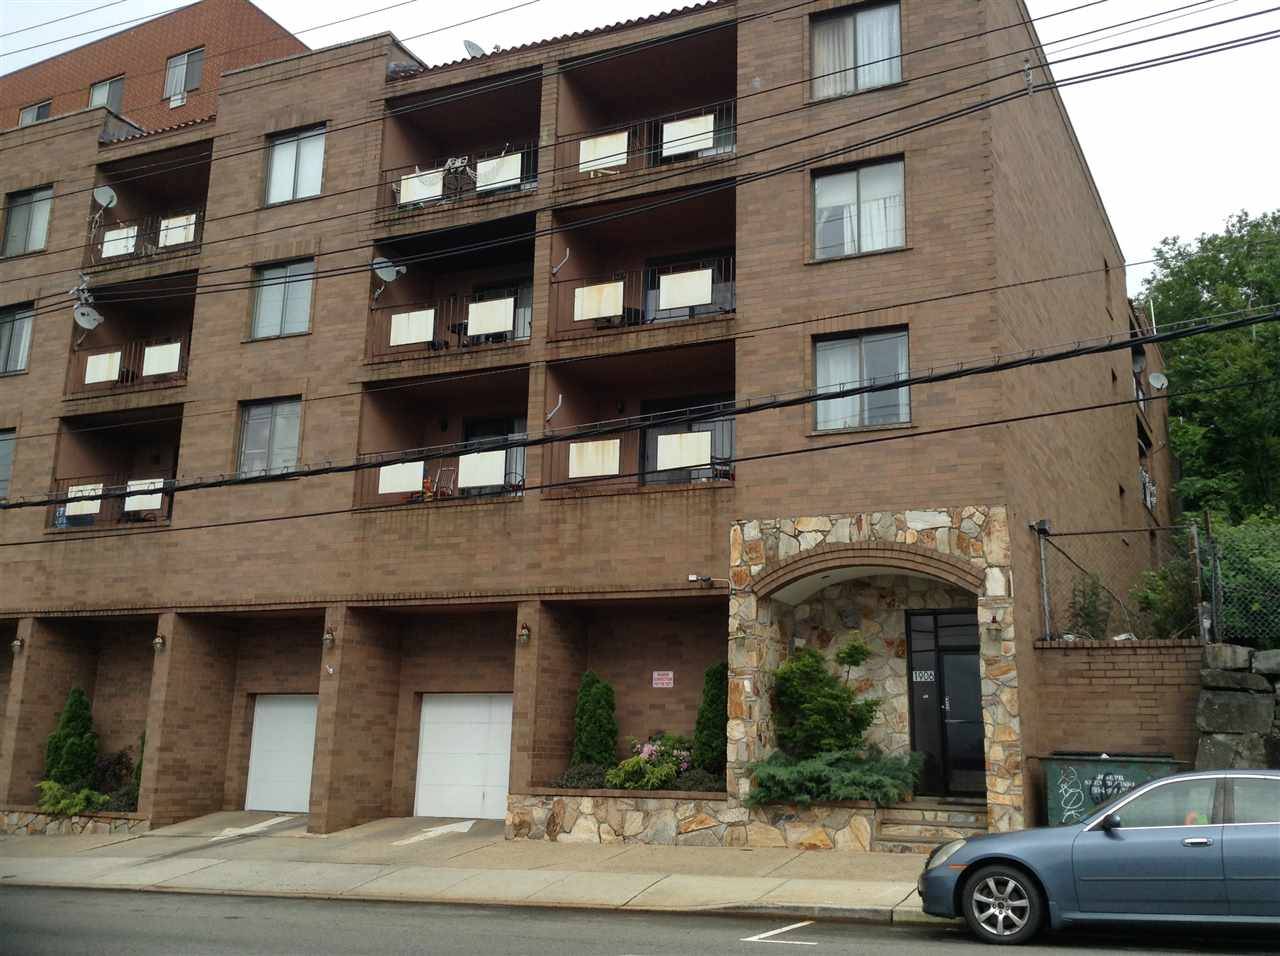 LARGE TWO BEDROOMS TWO BATHROOMS BEAUTIFUL CONDO - 2 BR Condo New Jersey